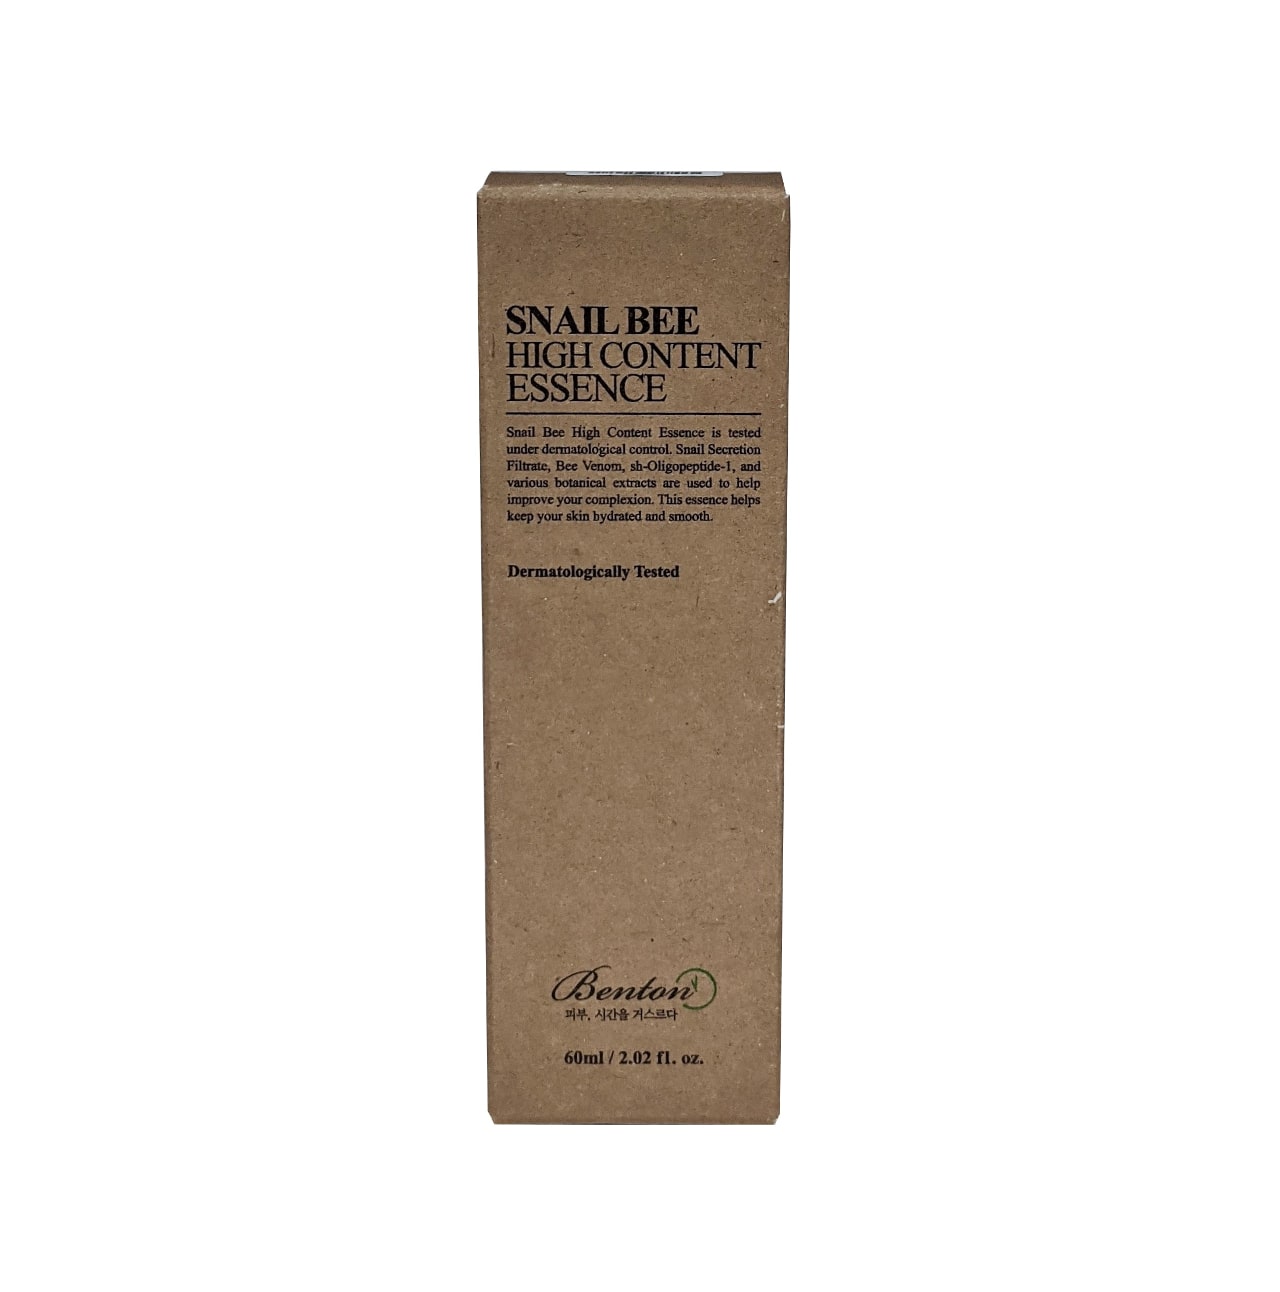 Product label for Benton Snail Bee High Content Essence